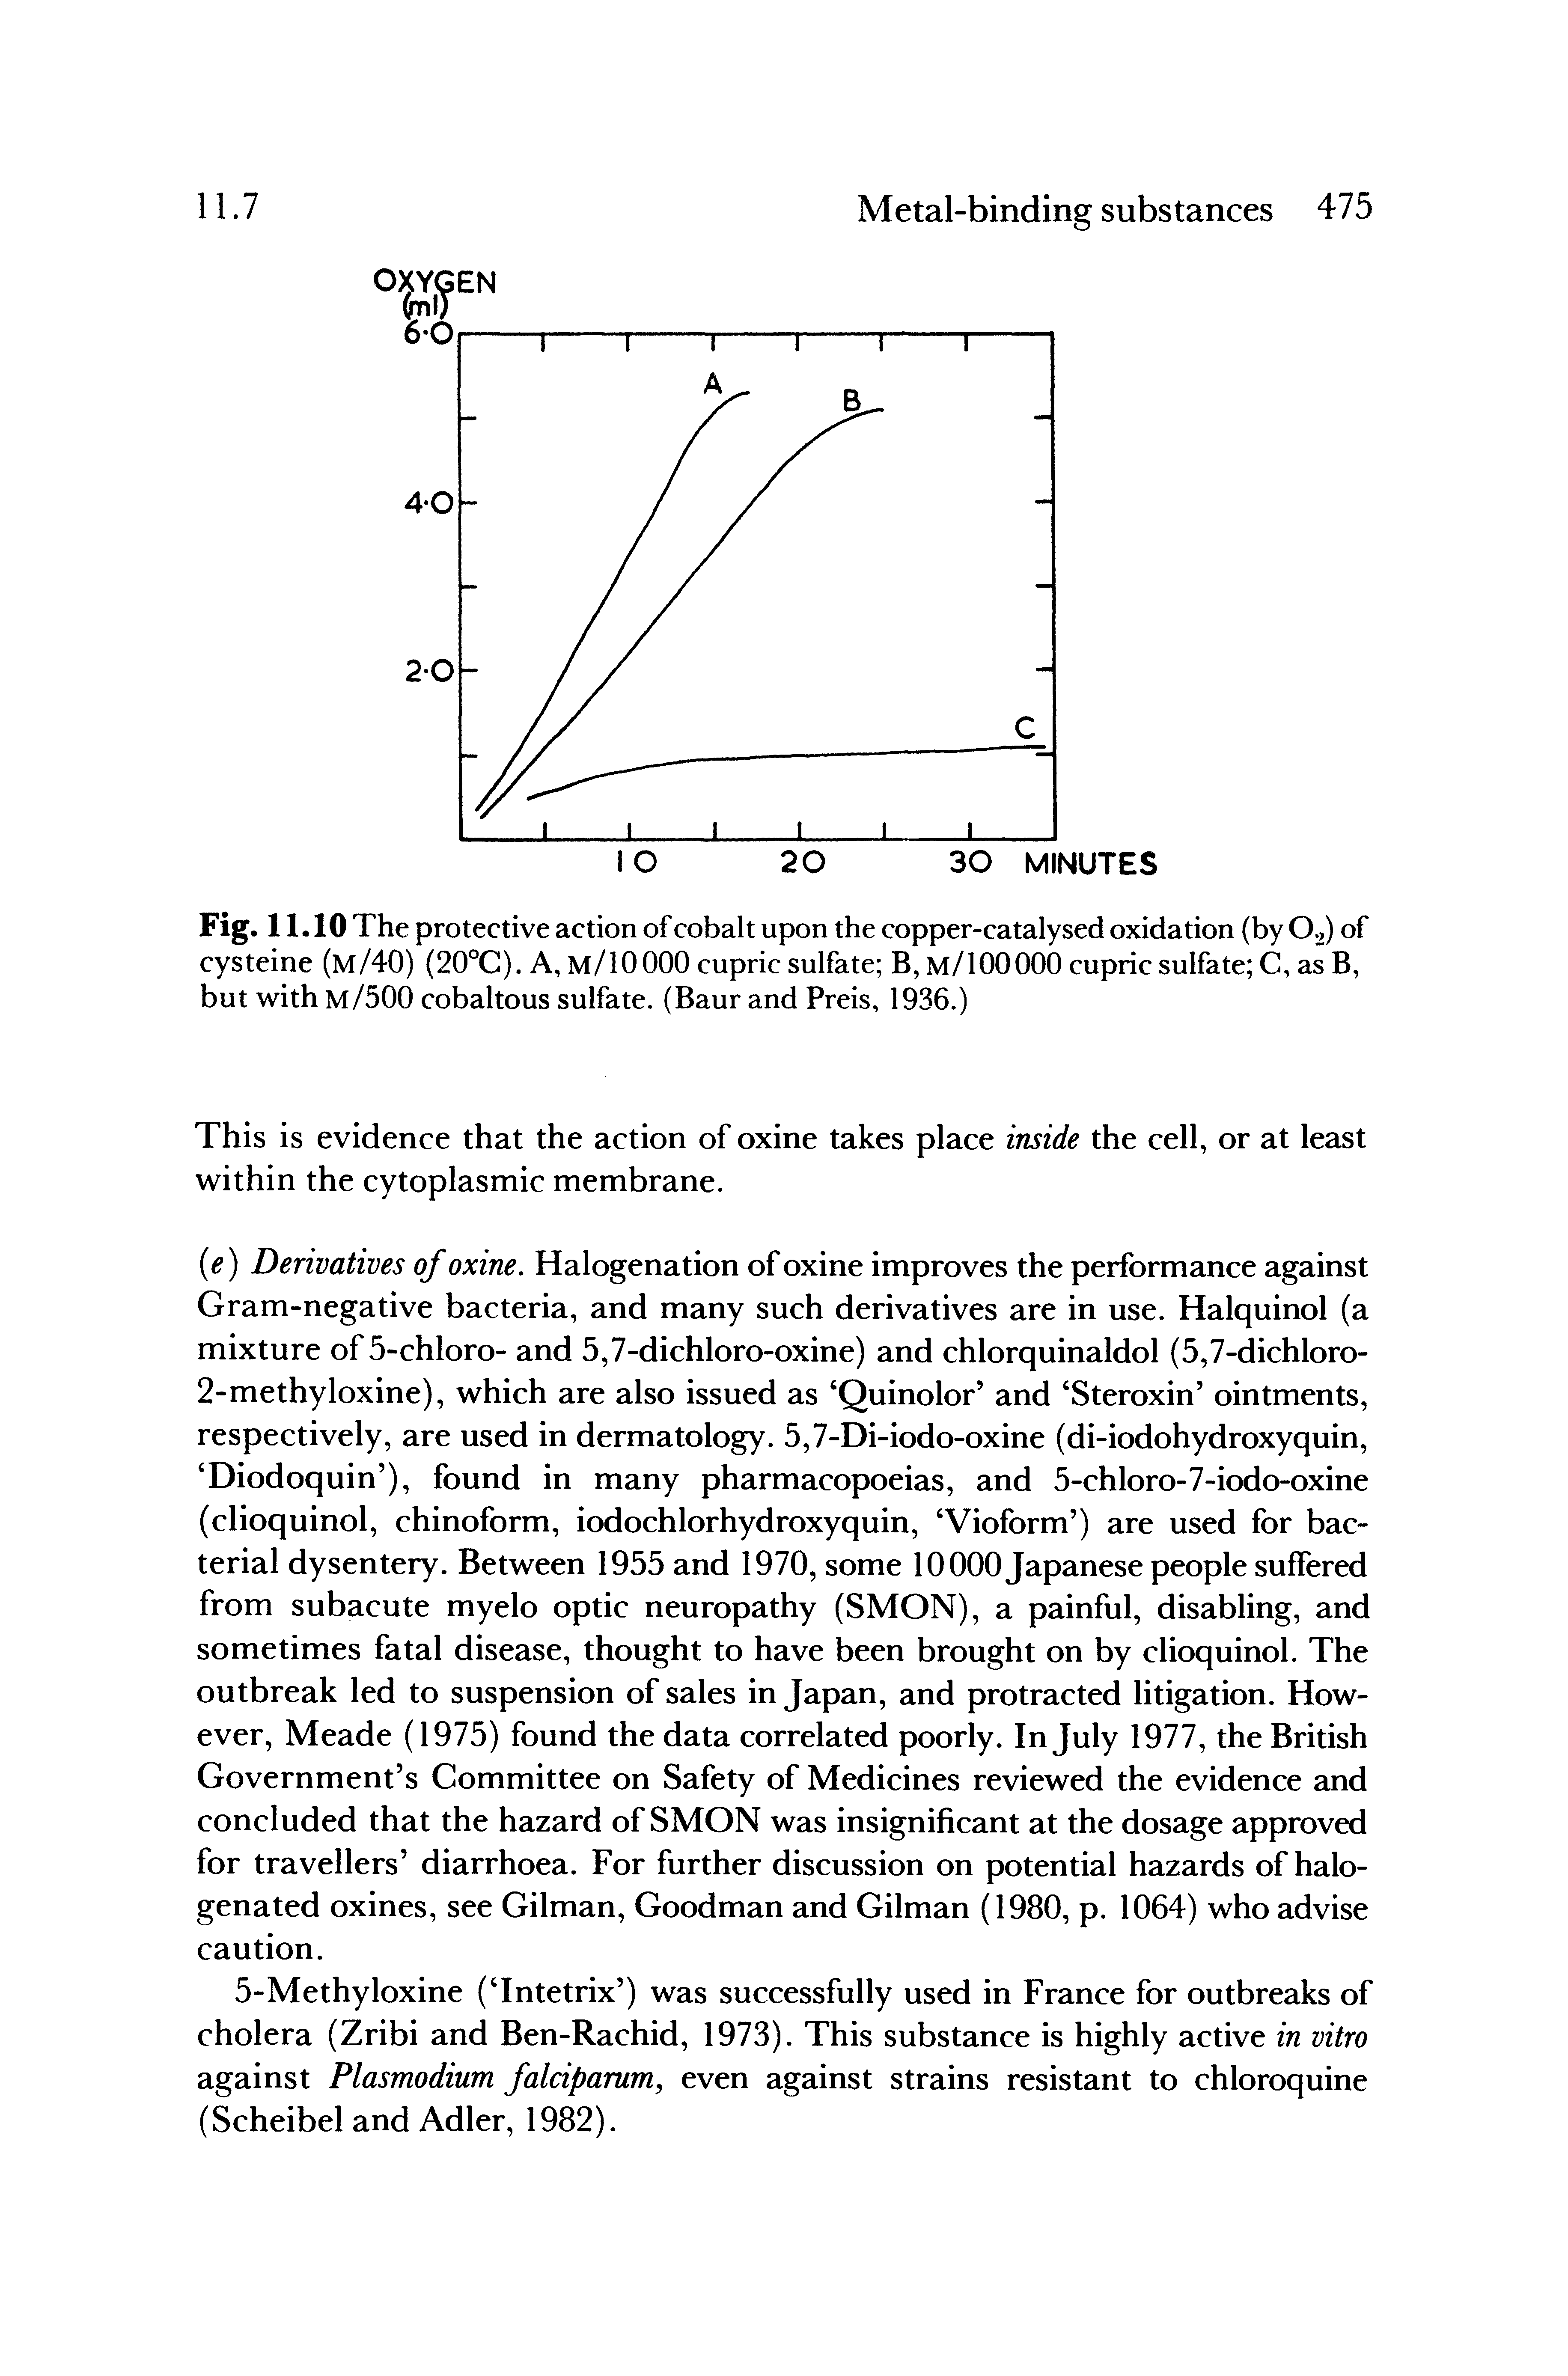 Fig. 11.10 The protective action of cobalt upon the copper-catalysed oxidation (by O2) of cysteine (m/40) (20°C). A, m/10000 cupric sulfate B, M/100000 cupric sulfate C, as B, but with m/500 cobaltous sulfate. (Baur and Preis, 1936.)...